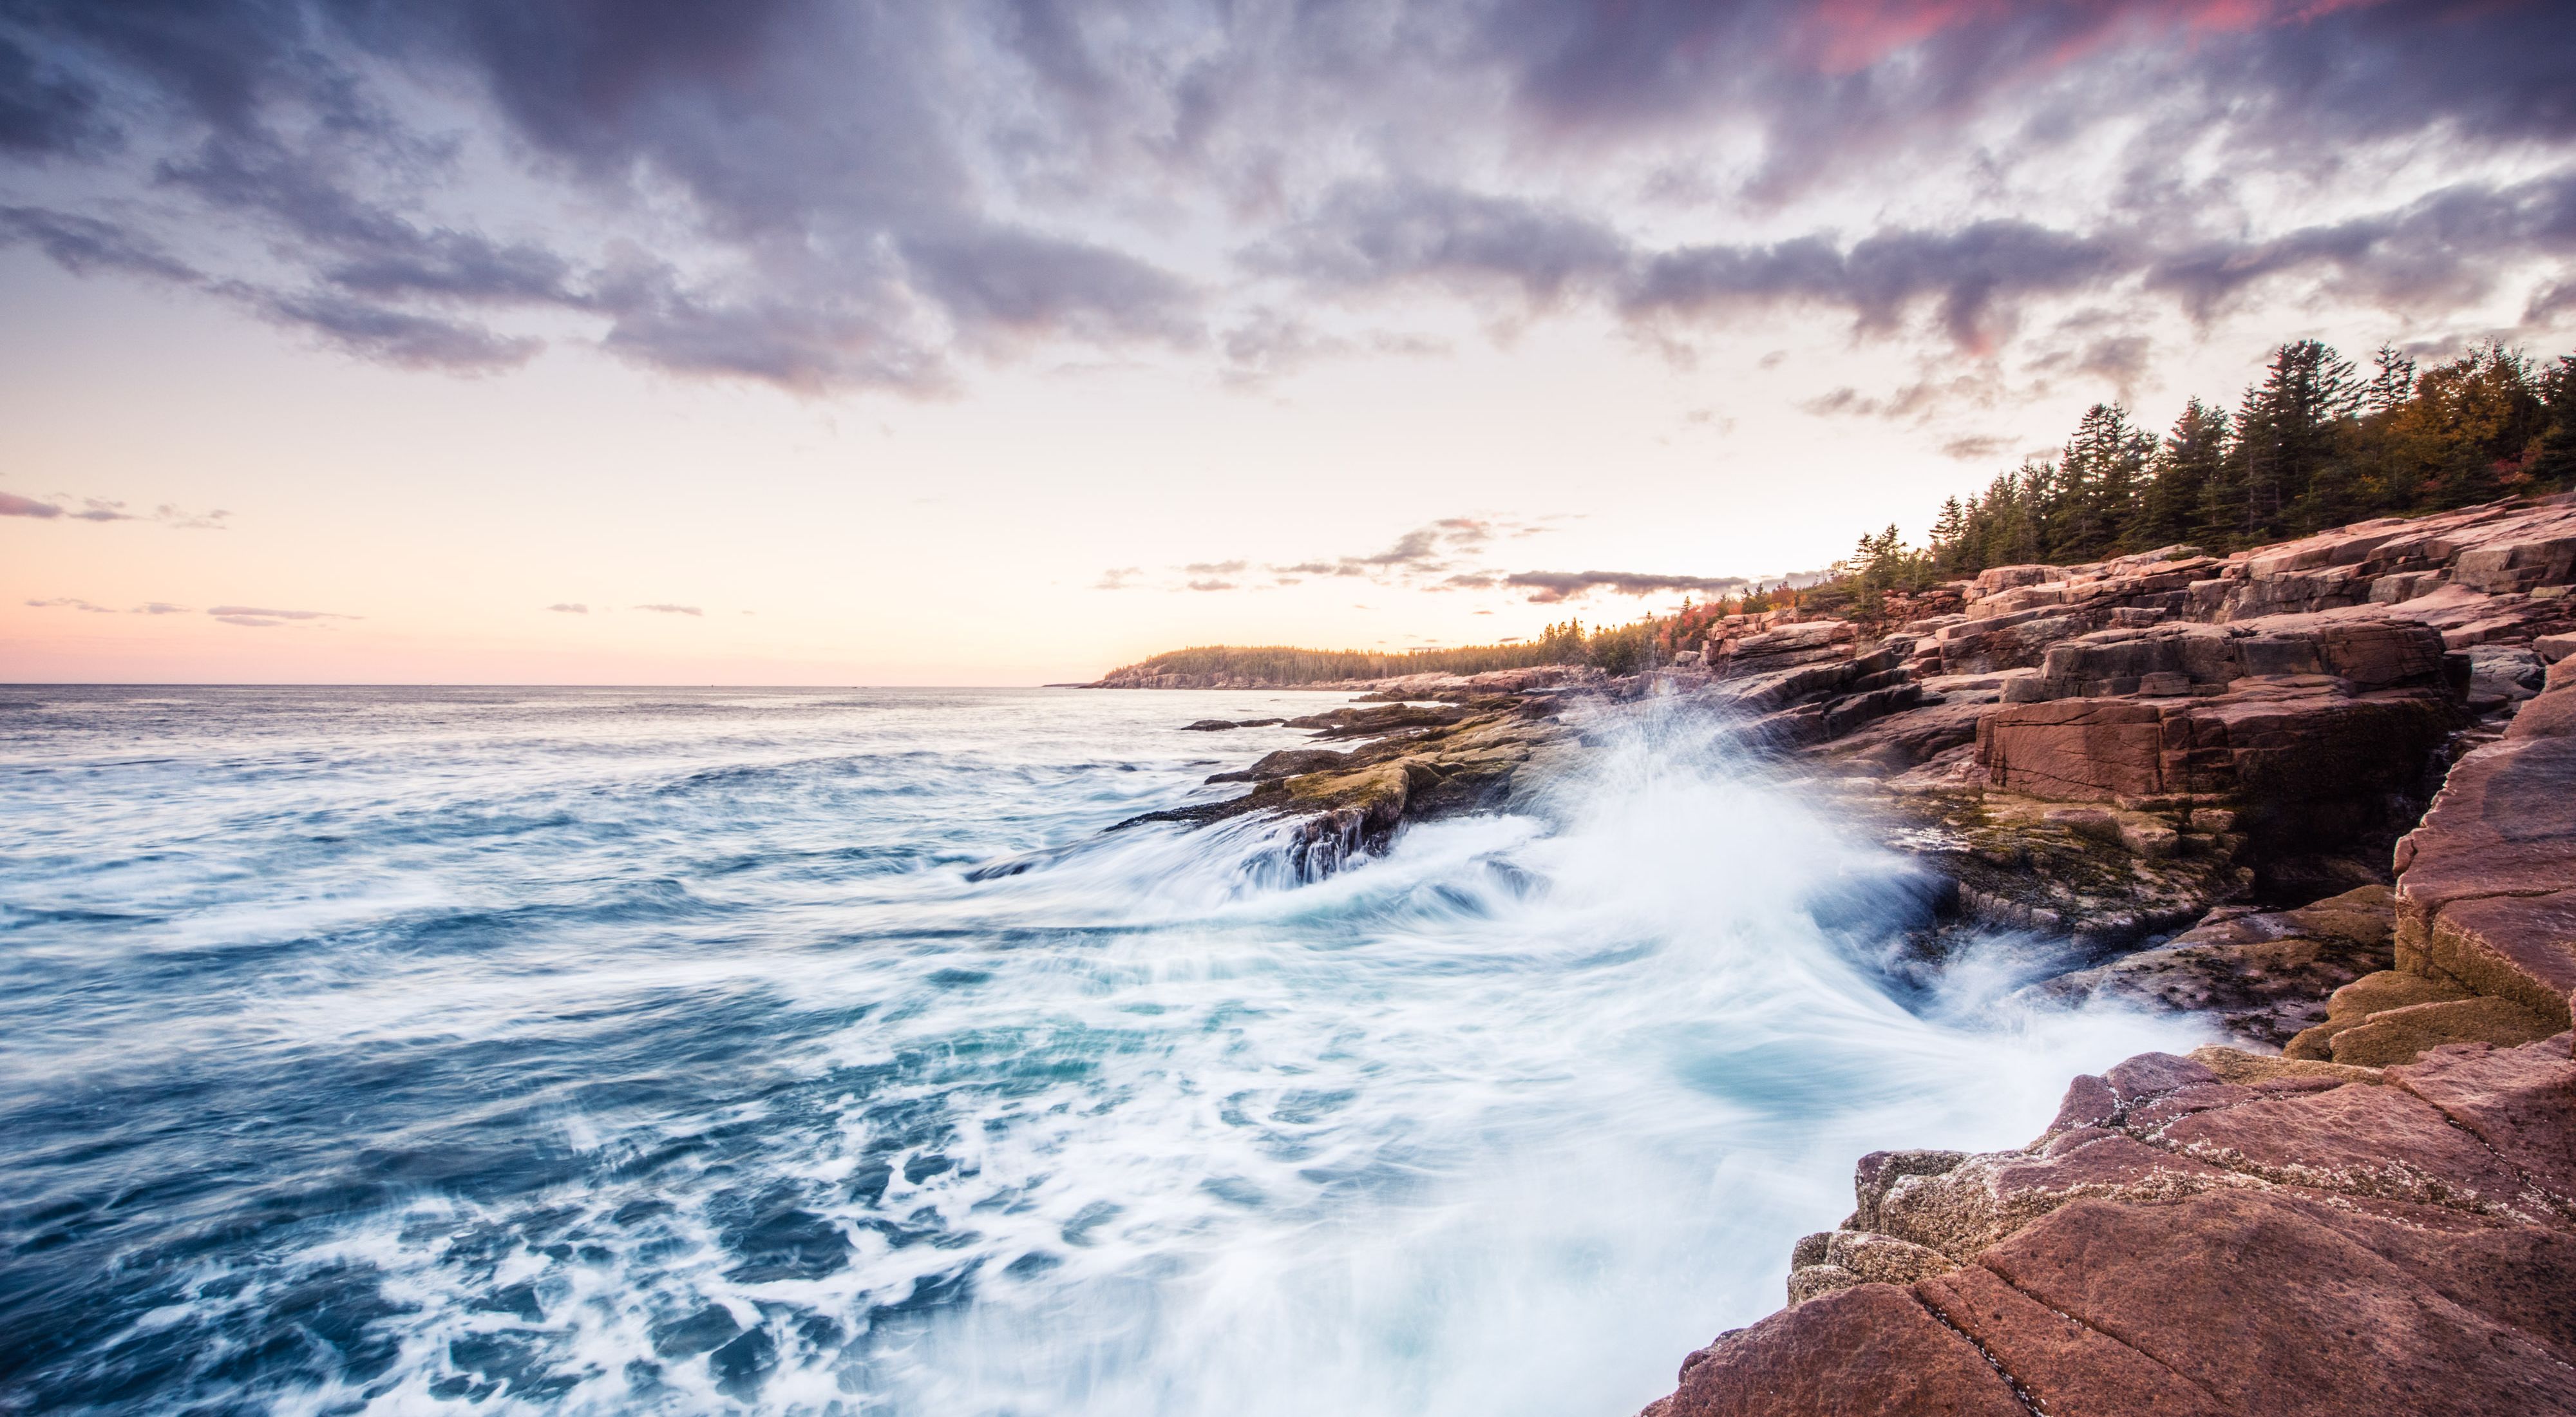 (ALL INTERNAL RIGHTS & LIMITED EXTERNAL RIGHTS) October 2015. Waves crashing against the rocky coast of Acadia National at sunset in Maine. The park service and vistor's celebrate 100 years of parks in August 2016. Photo credit: © Nick Hall